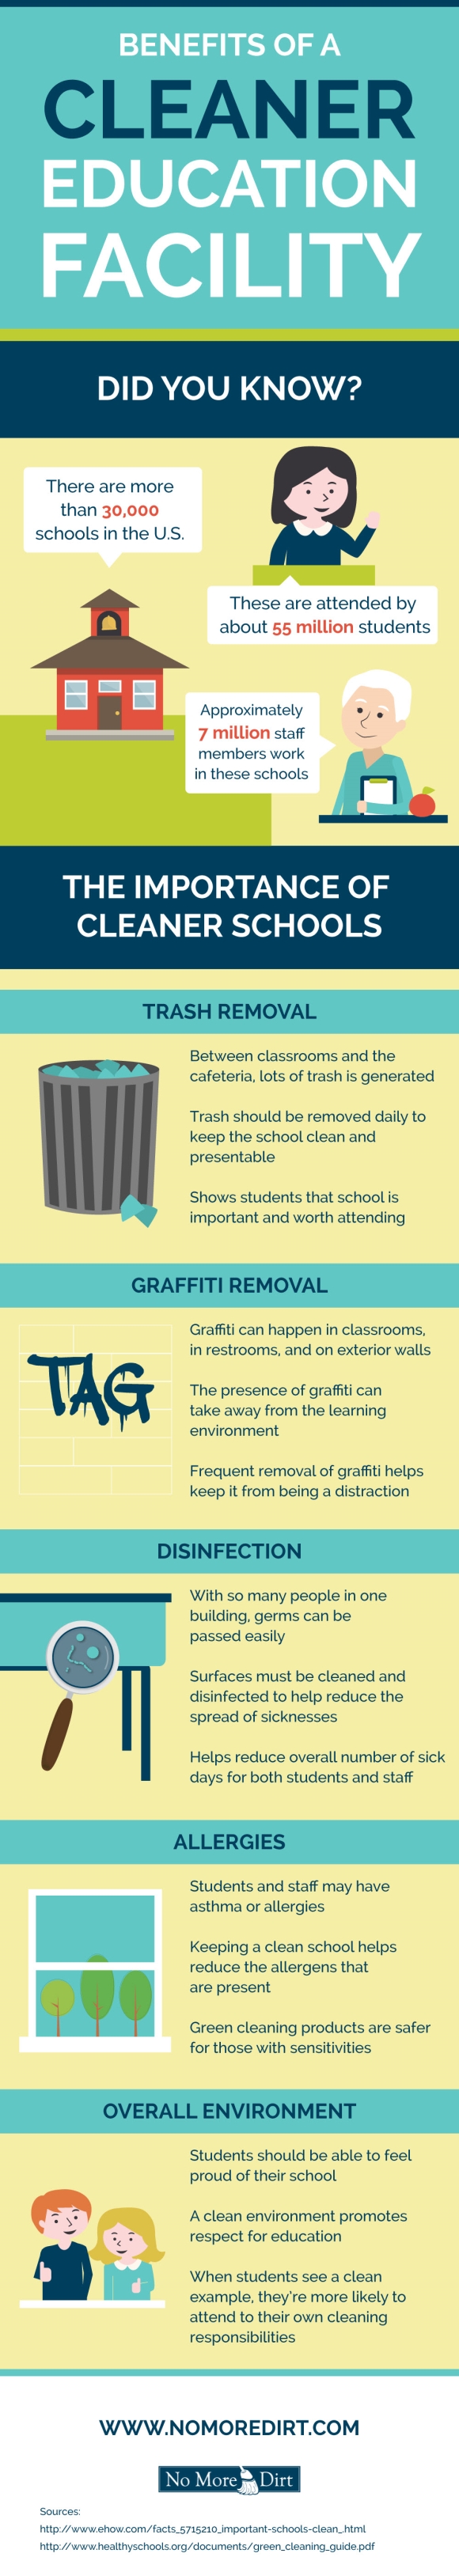 BENEFITS OF A CLEANER EDUCATION FACILITY | Visual.ly